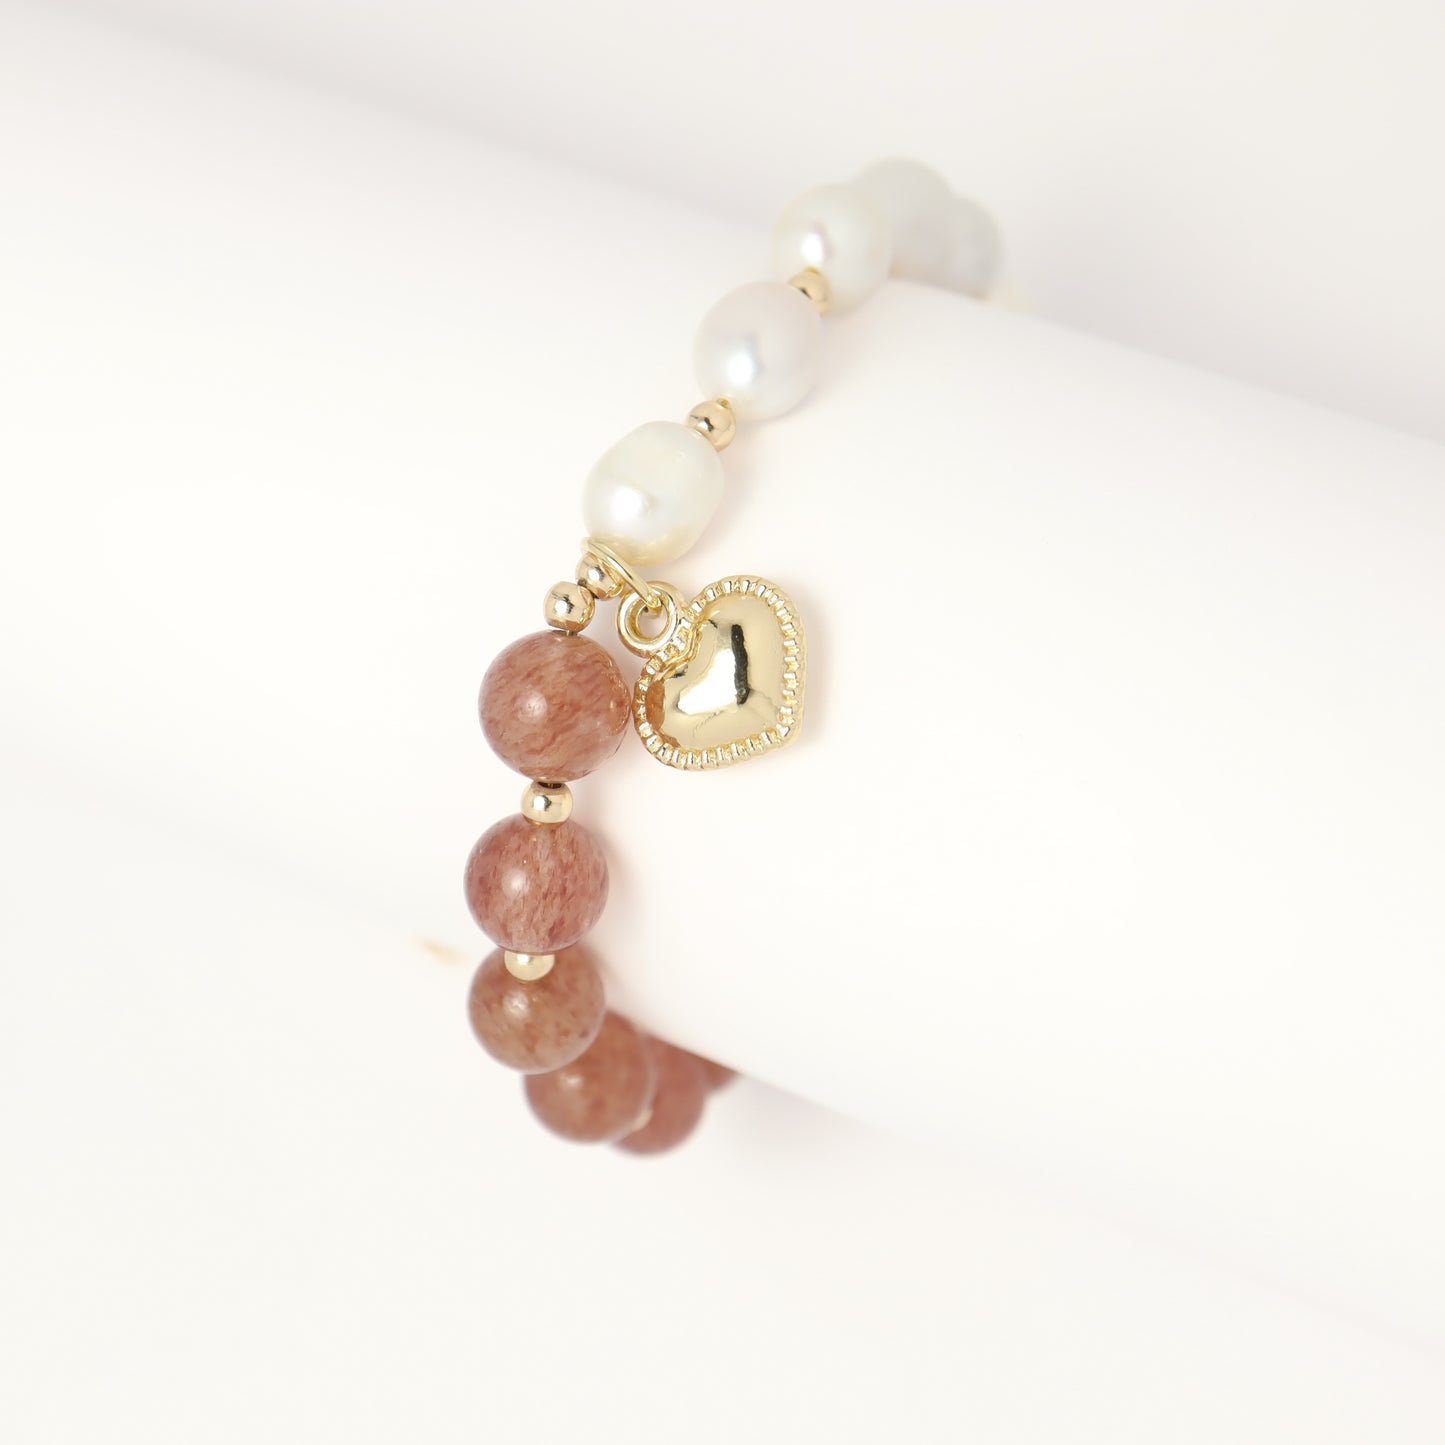 Only U - Heart Drop Strawberry Quartz & Freshwater Pearl Bracelet with Adjustable Chain